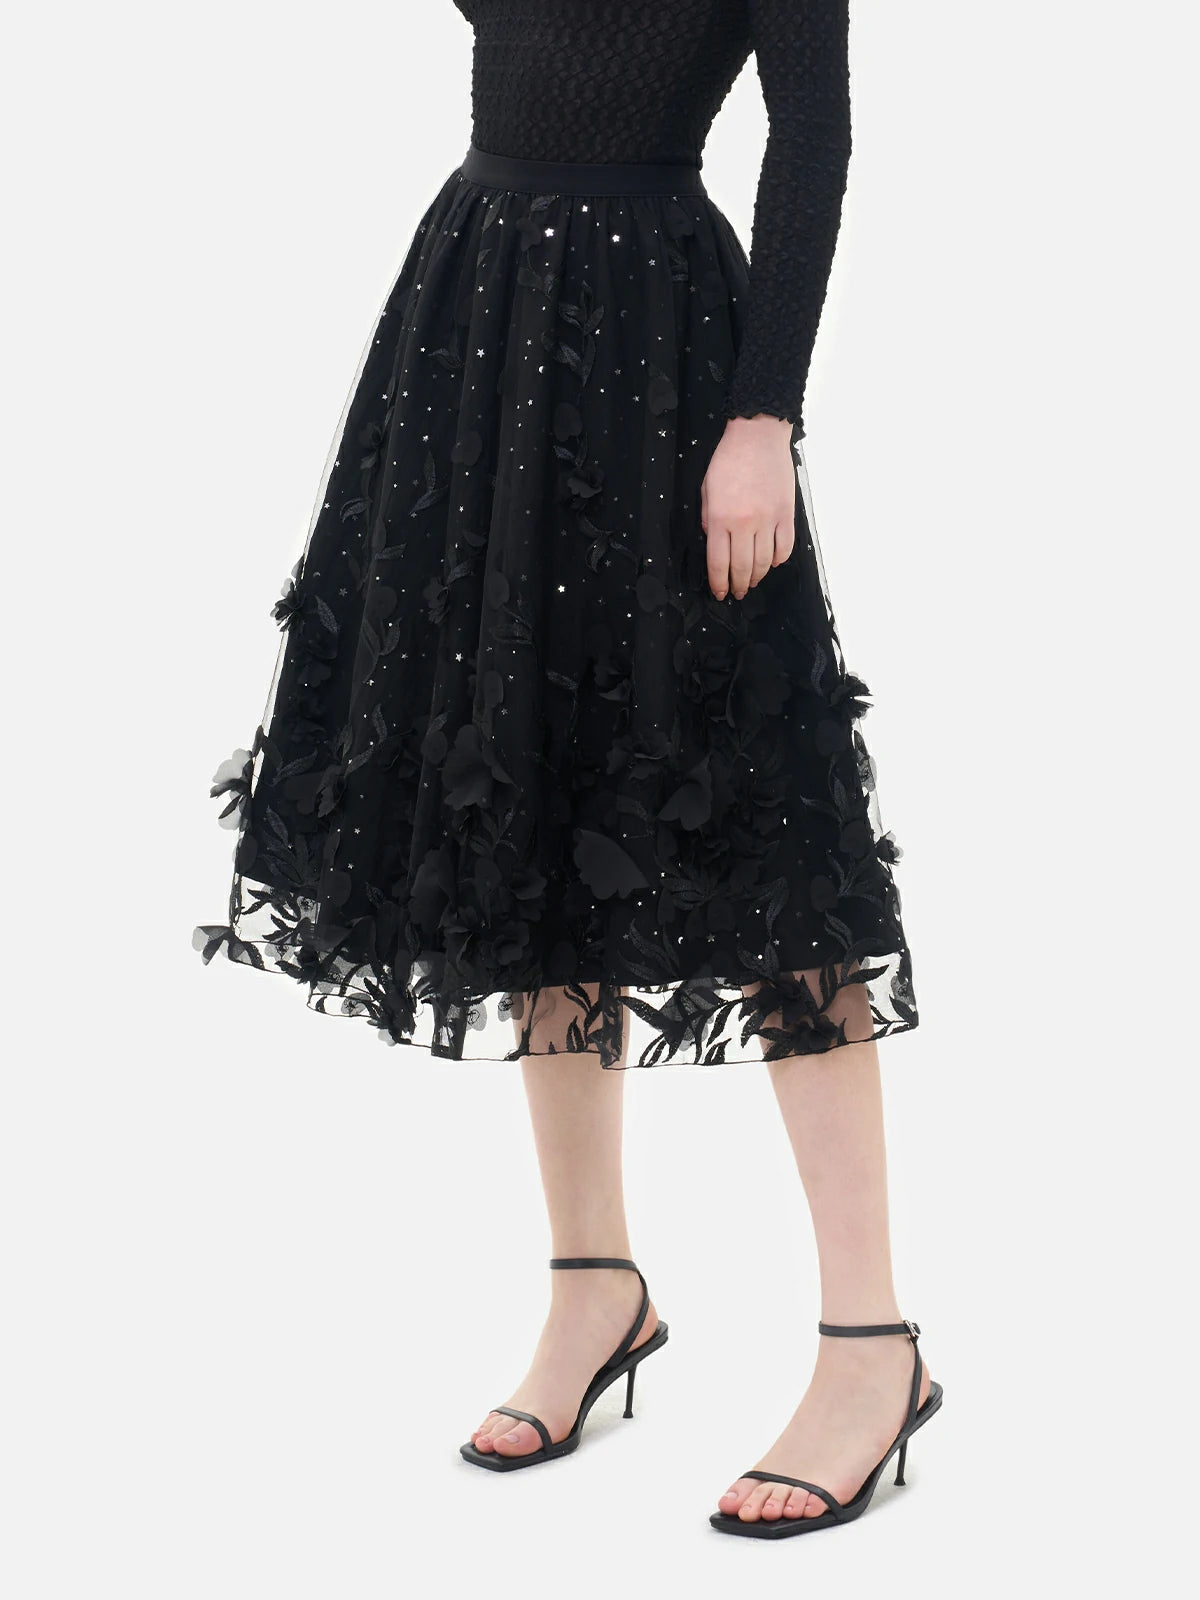 Lightweight sheer chiffon midi skirt featuring embroidered details and appliqué, showcasing artistic craftsmanship.